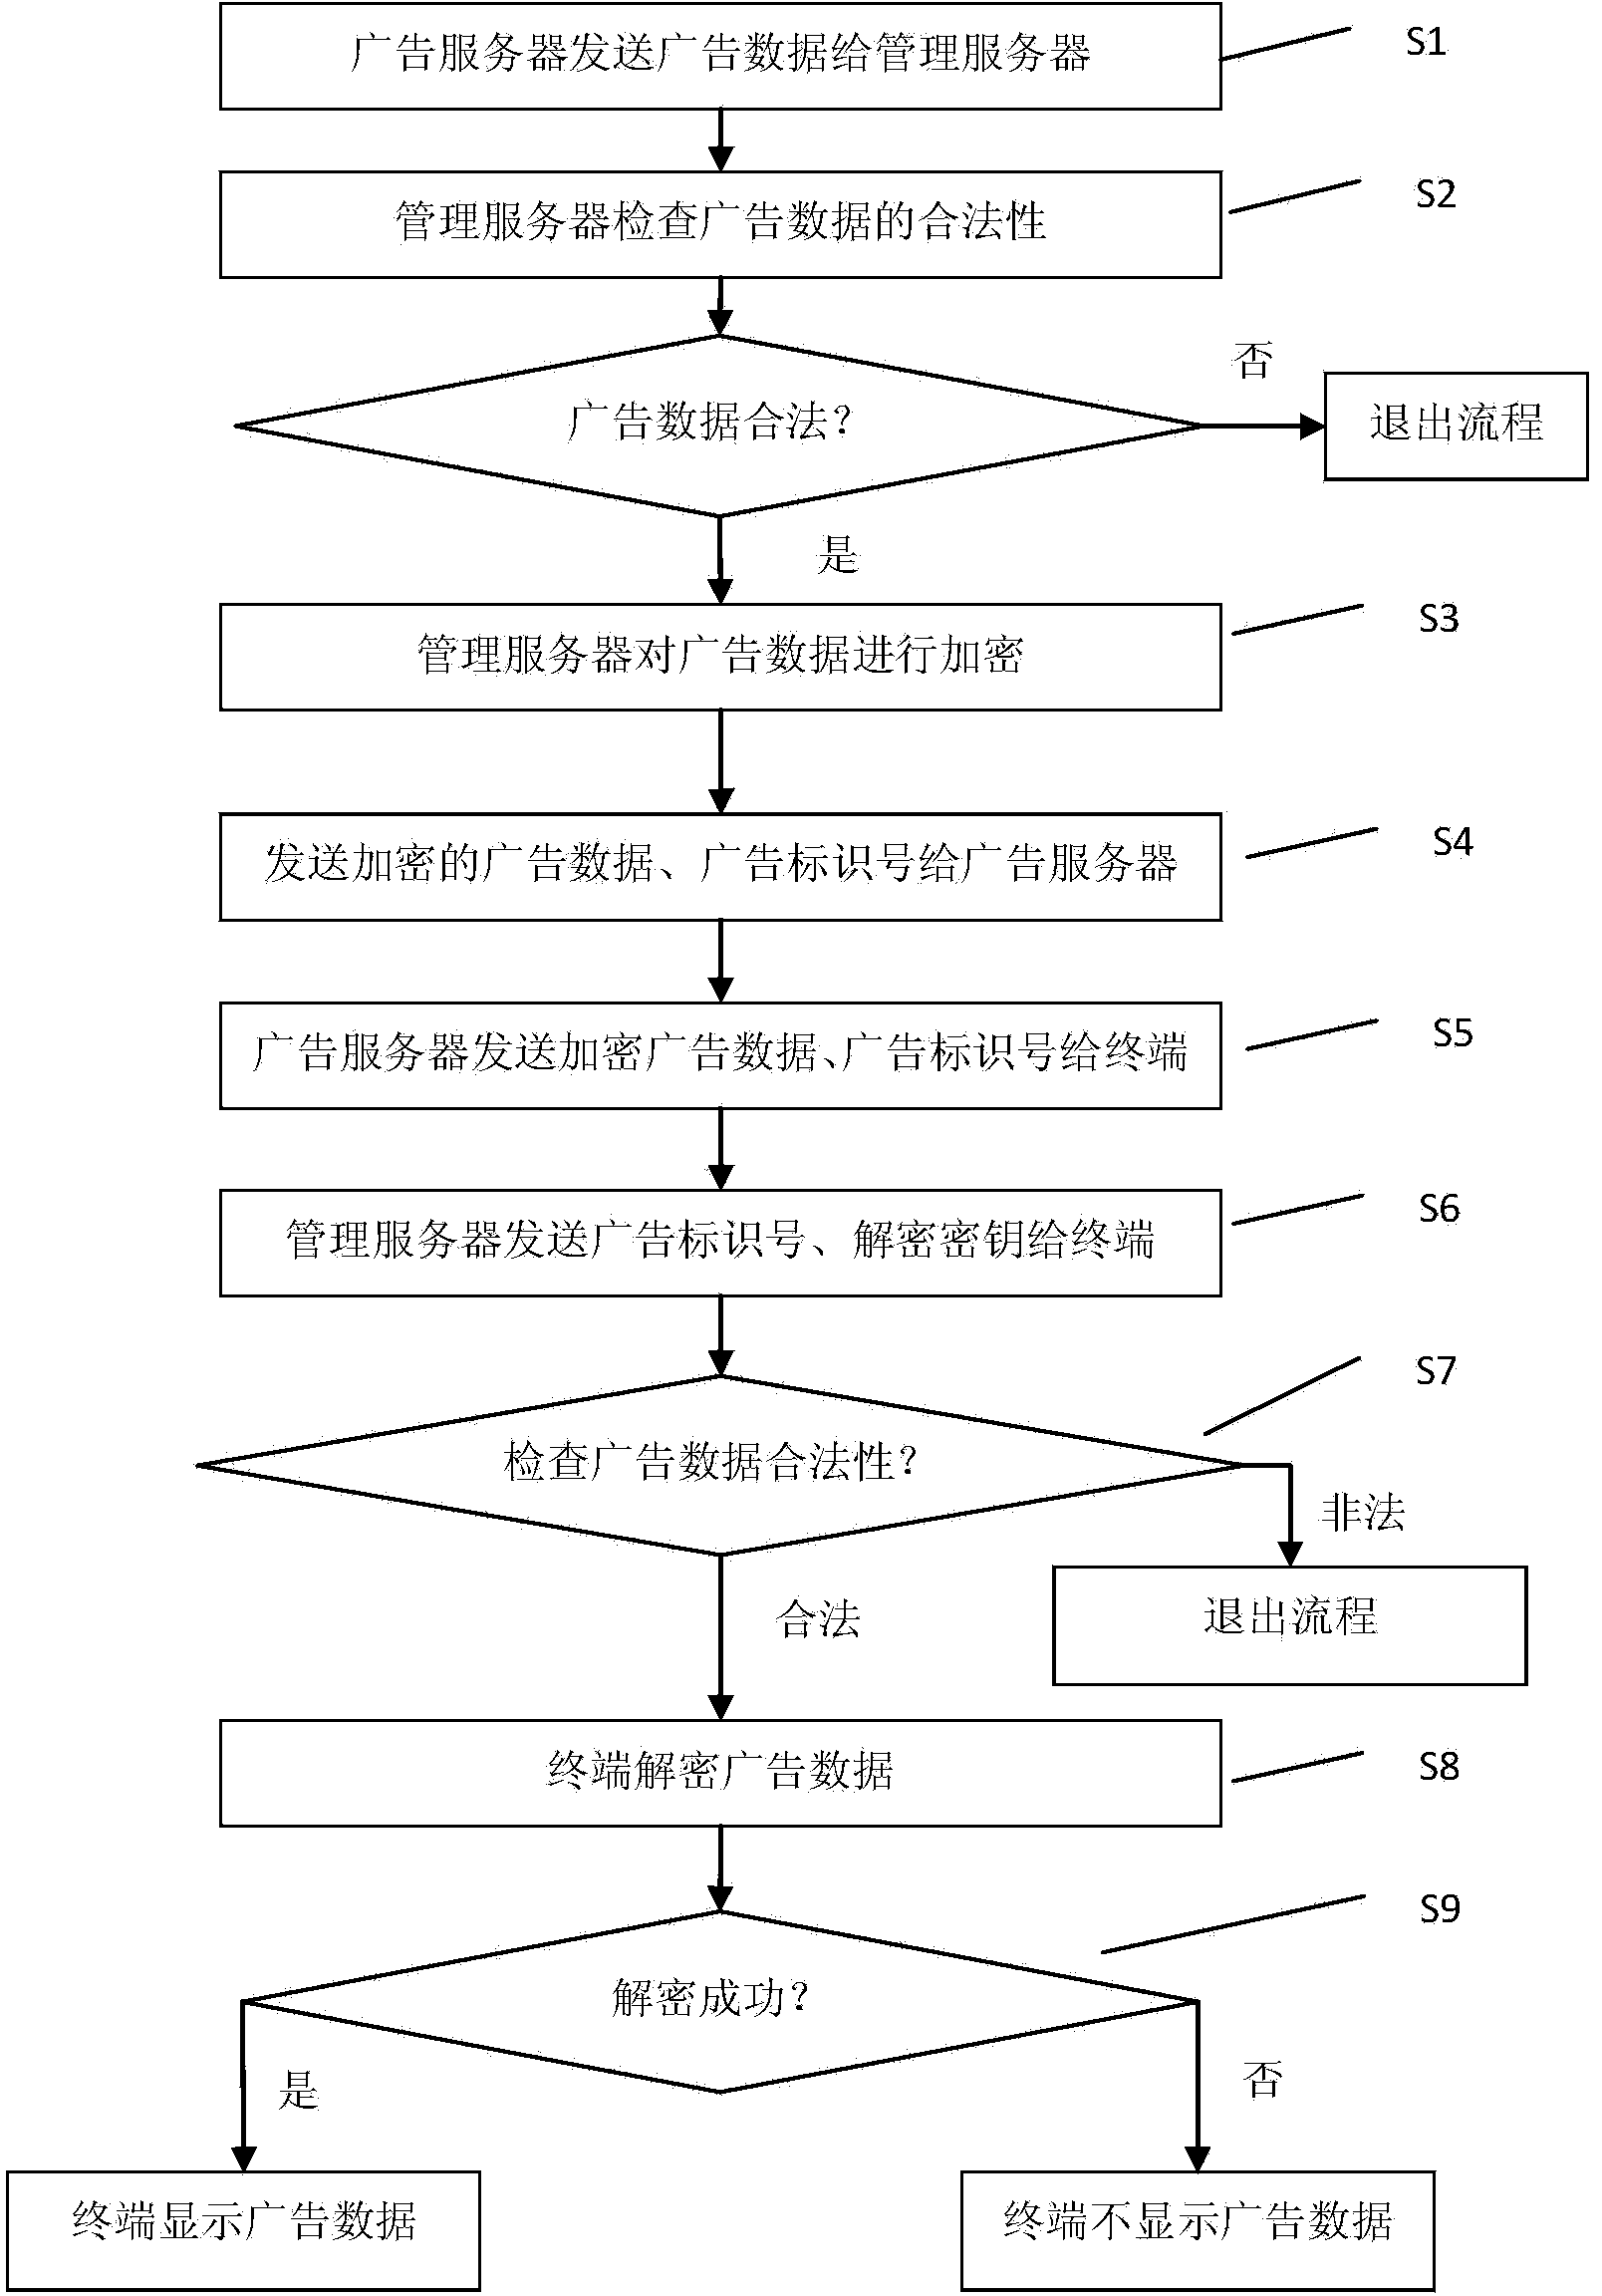 Method and system for preventing tampering with advertising content